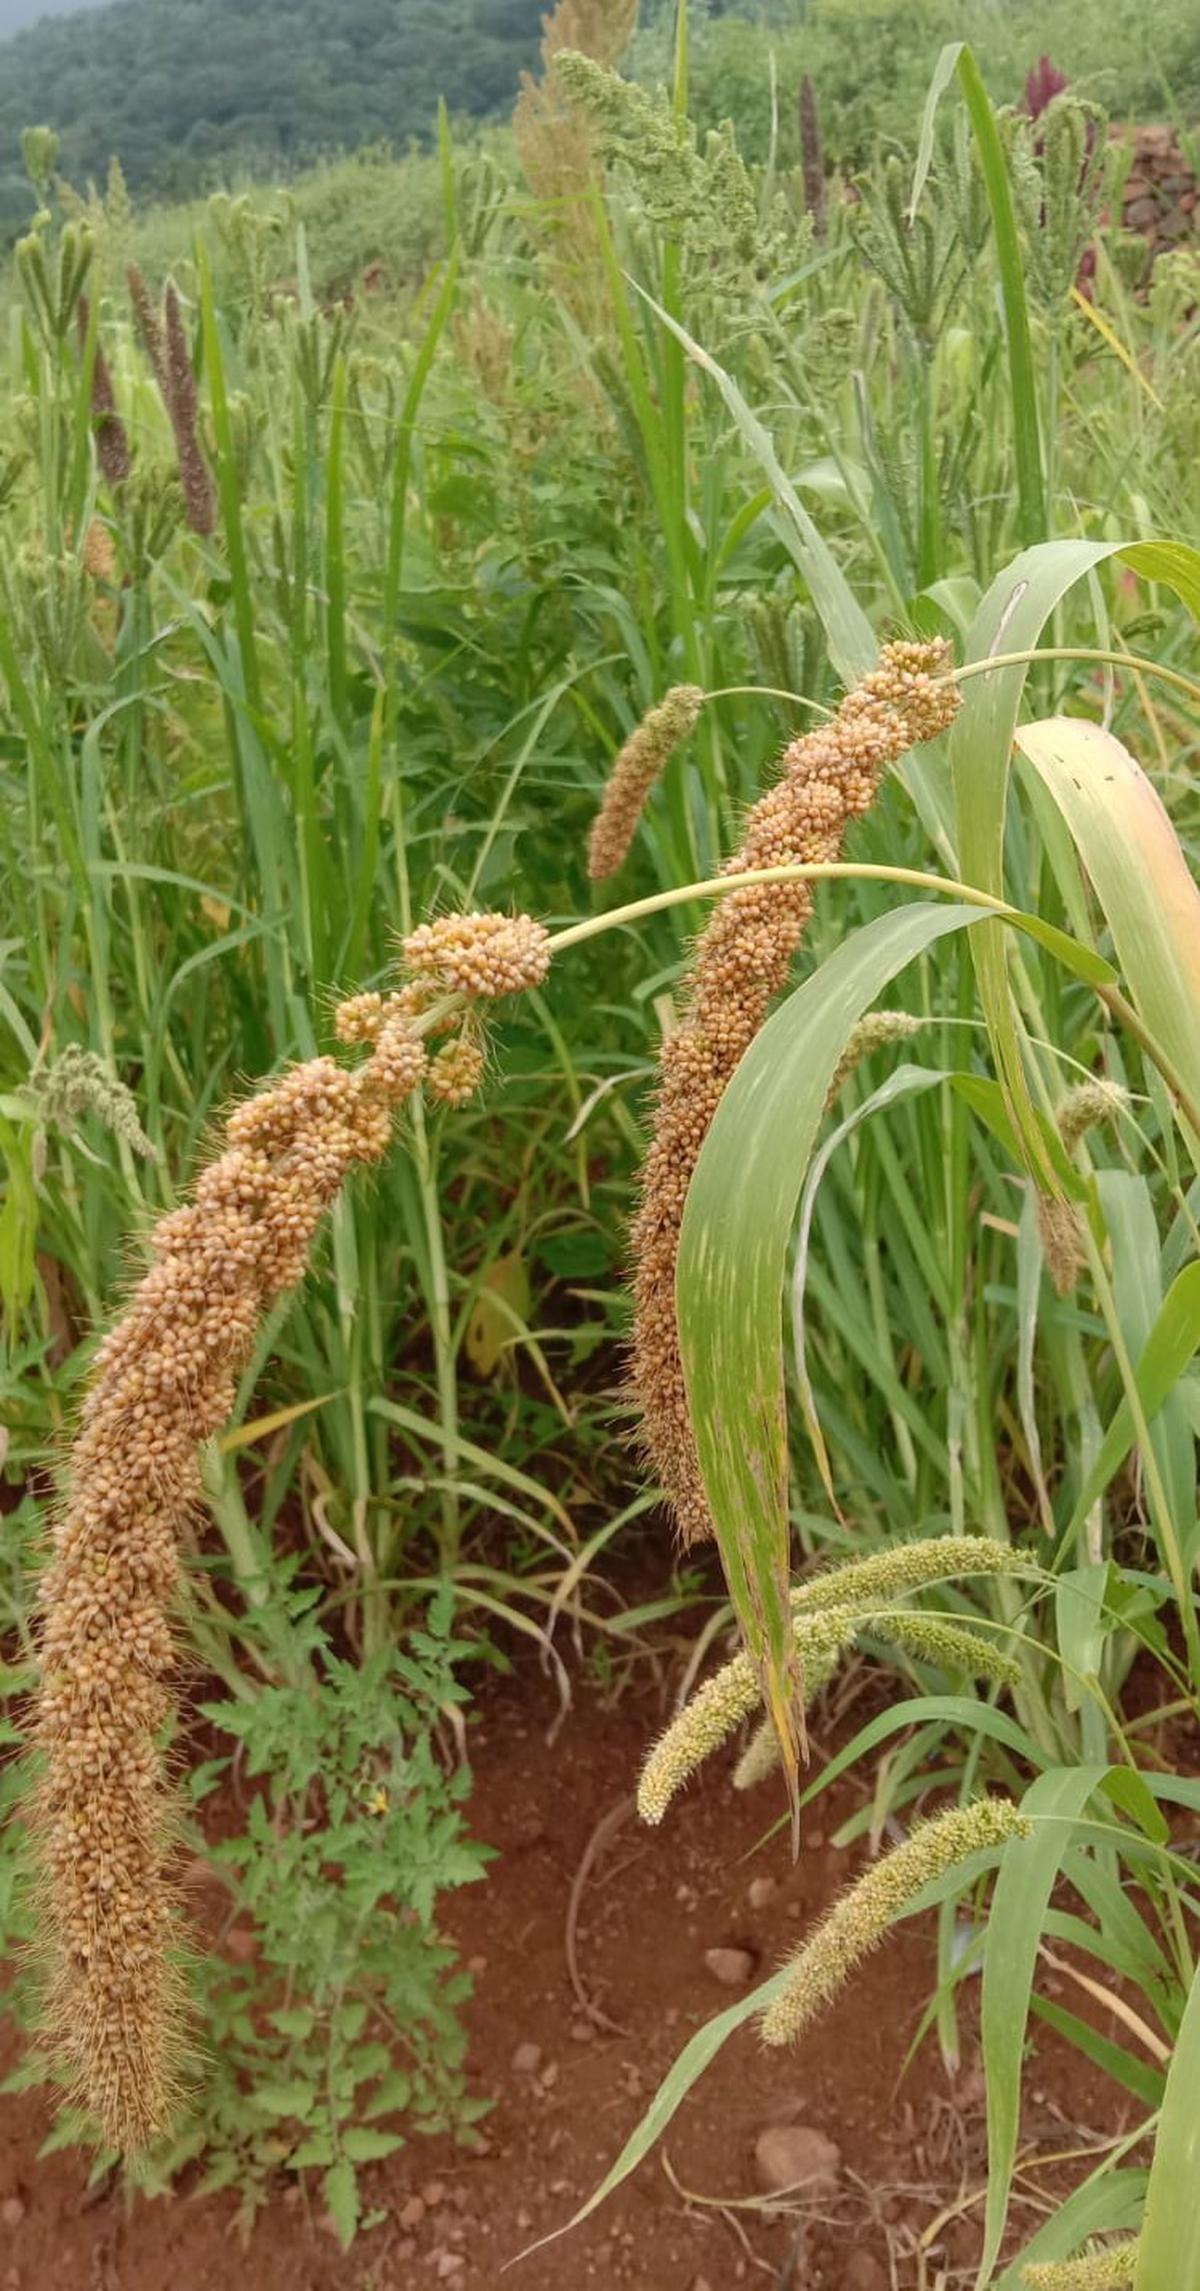 'Kuthiravali' or barnyard millet cultivated at Attappady